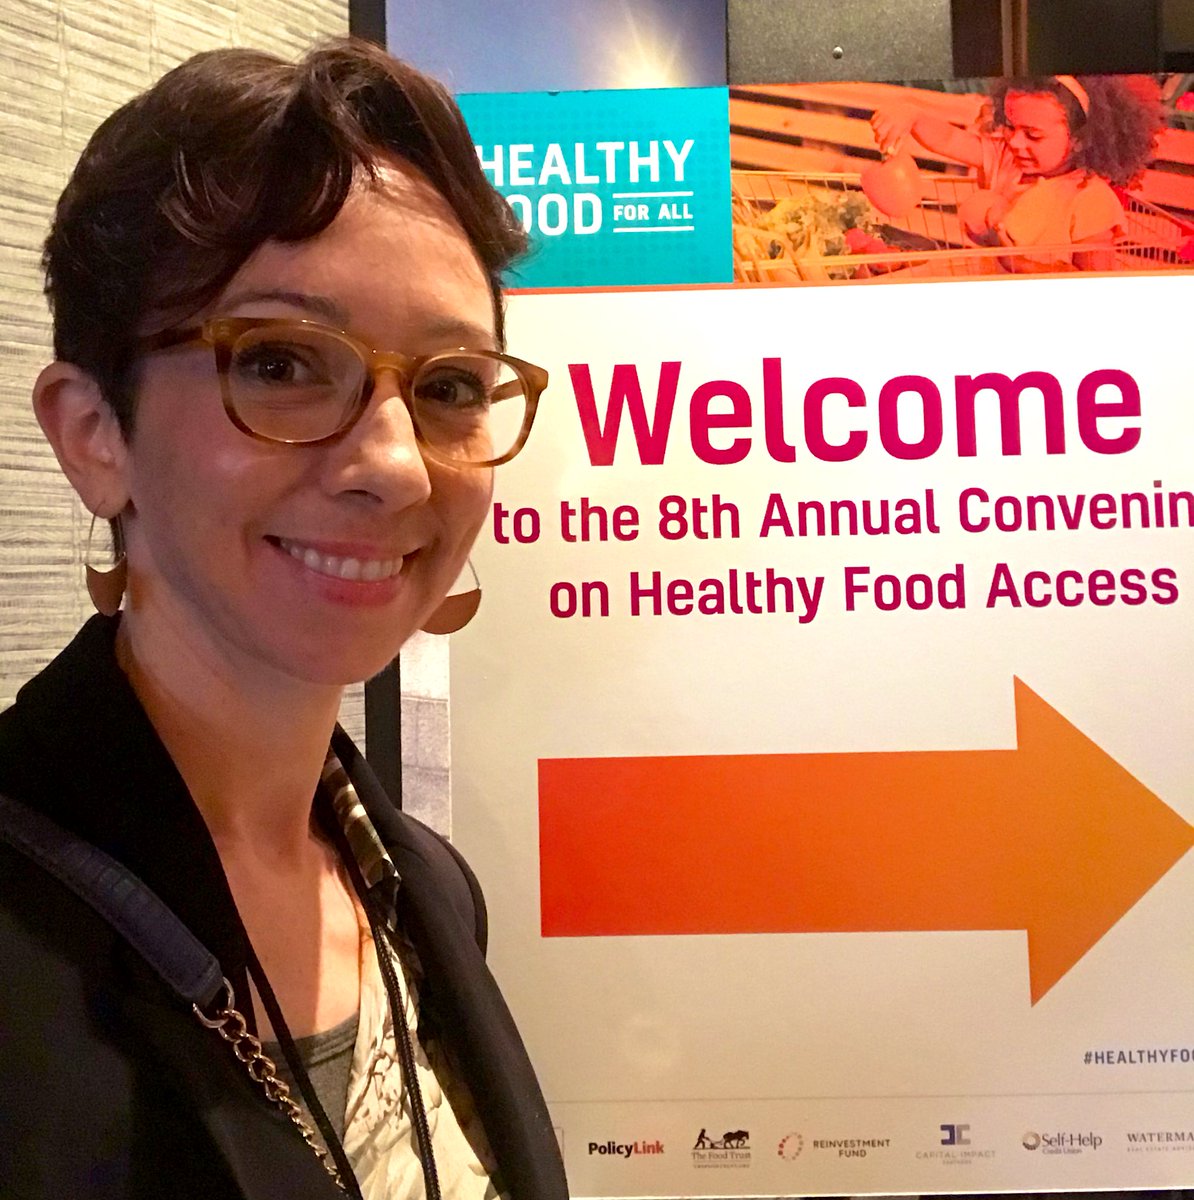 Been so excited to represent @godslovenyc and @fimcoalition at #HealthyFoodForAll talking #medicallytailoredmeals! TY @policylink @reinvestfund @thefoodtrust! #foodismedicine